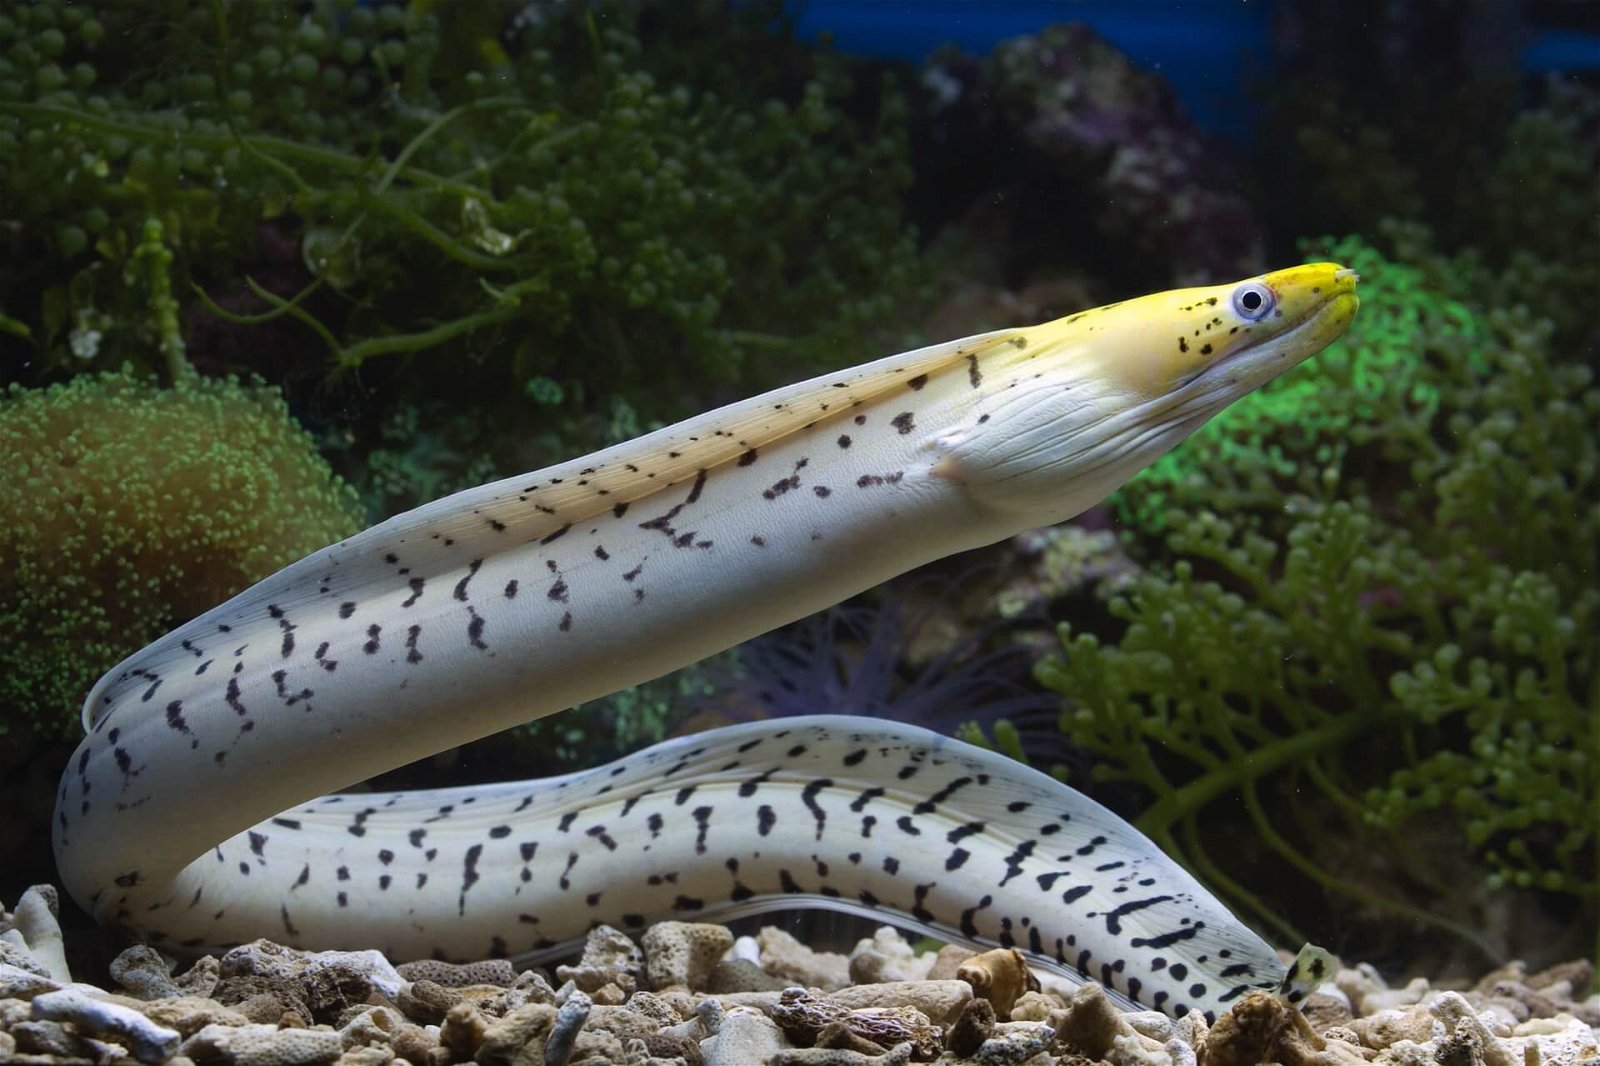 A white and black spotted eel
Description automatically generated